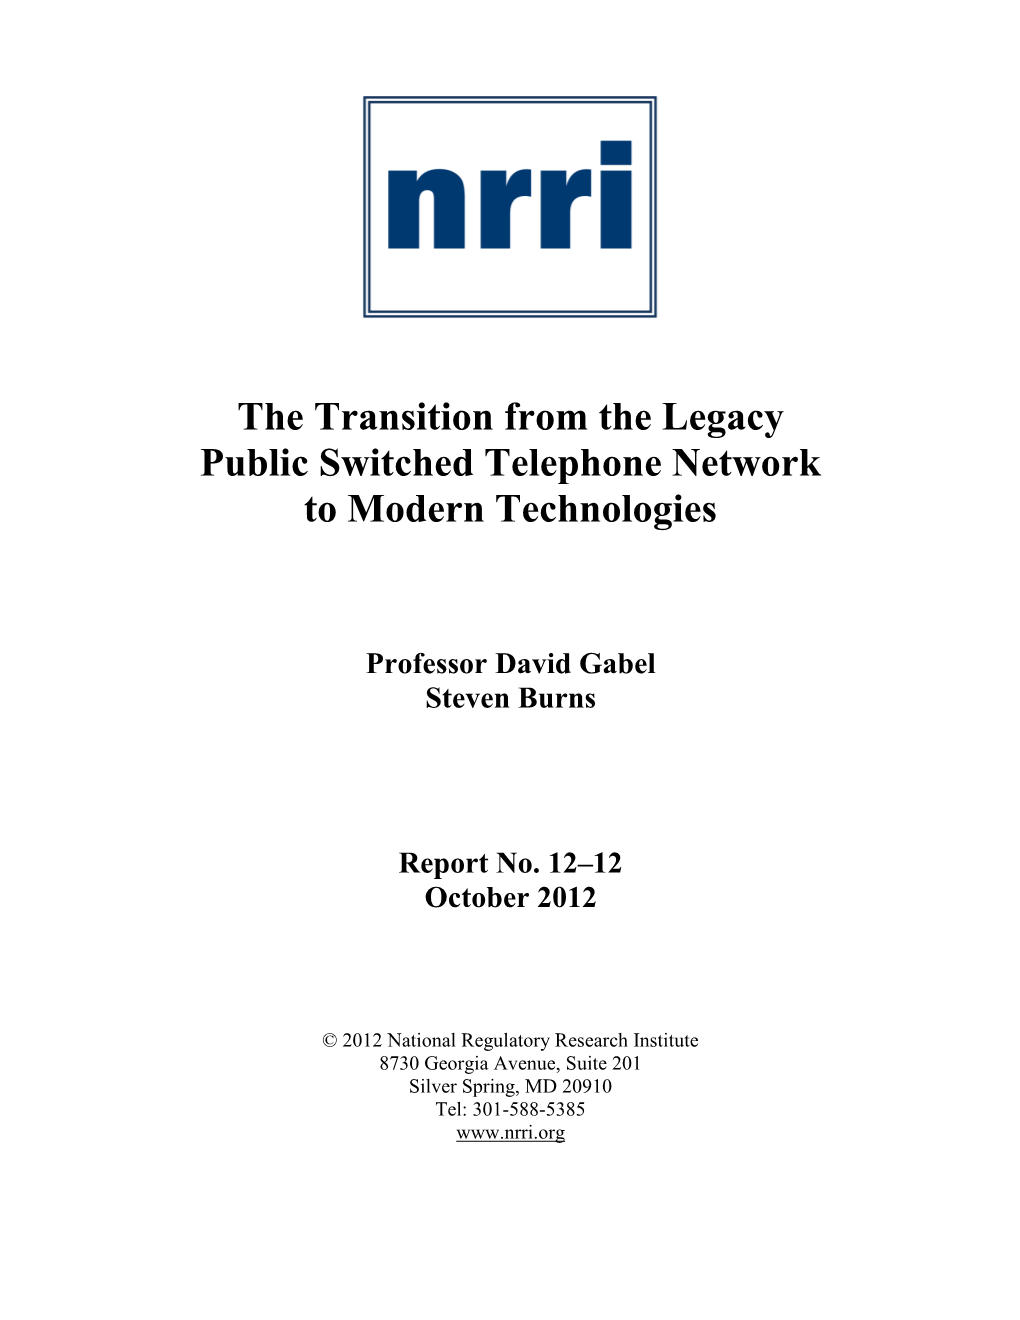 The Transition from the Legacy Public Switched Telephone Network to Modern Technologies